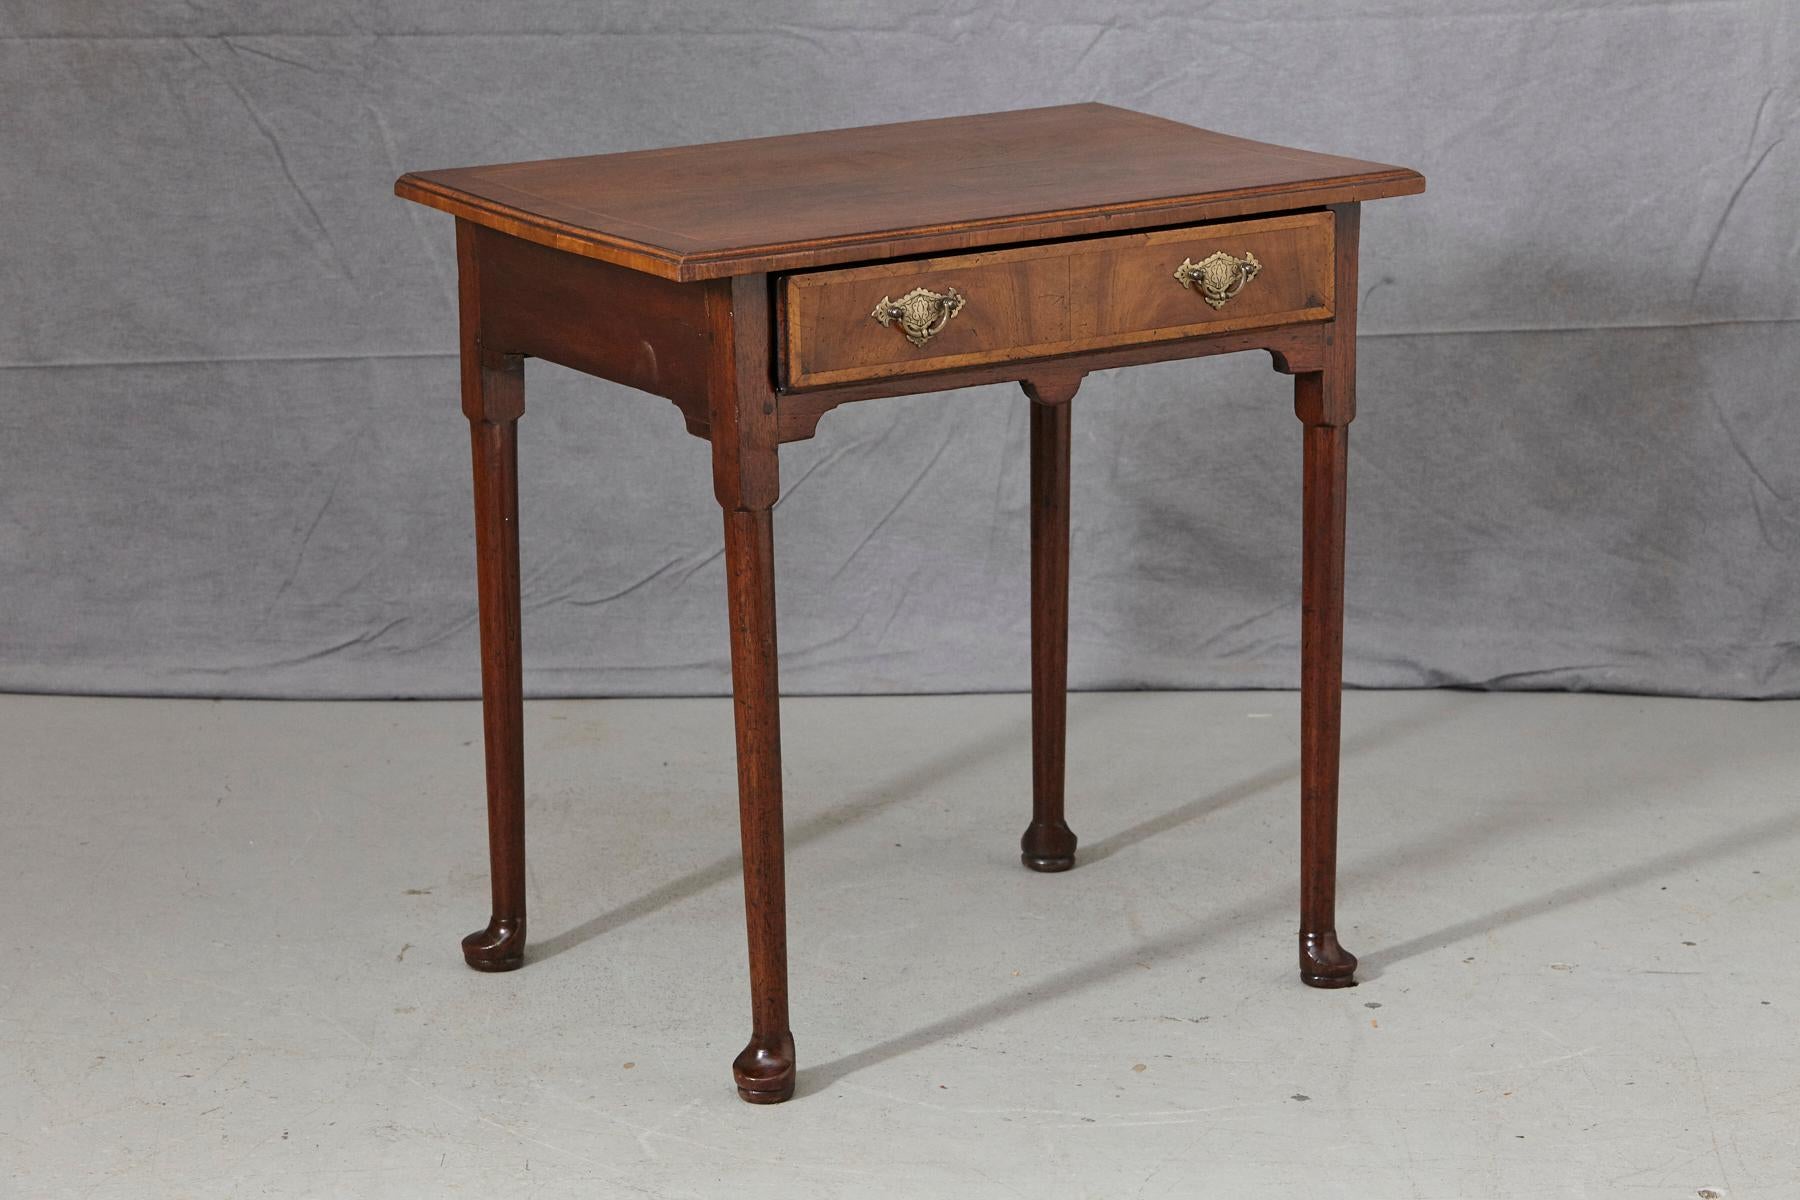 Beautiful crafted late 19th century Queen Anne style rectangular-shaped walnut side table with wood inlays around the drawer and the top, standing on straight legs and pad feet. Full drawer with original brass hardware.